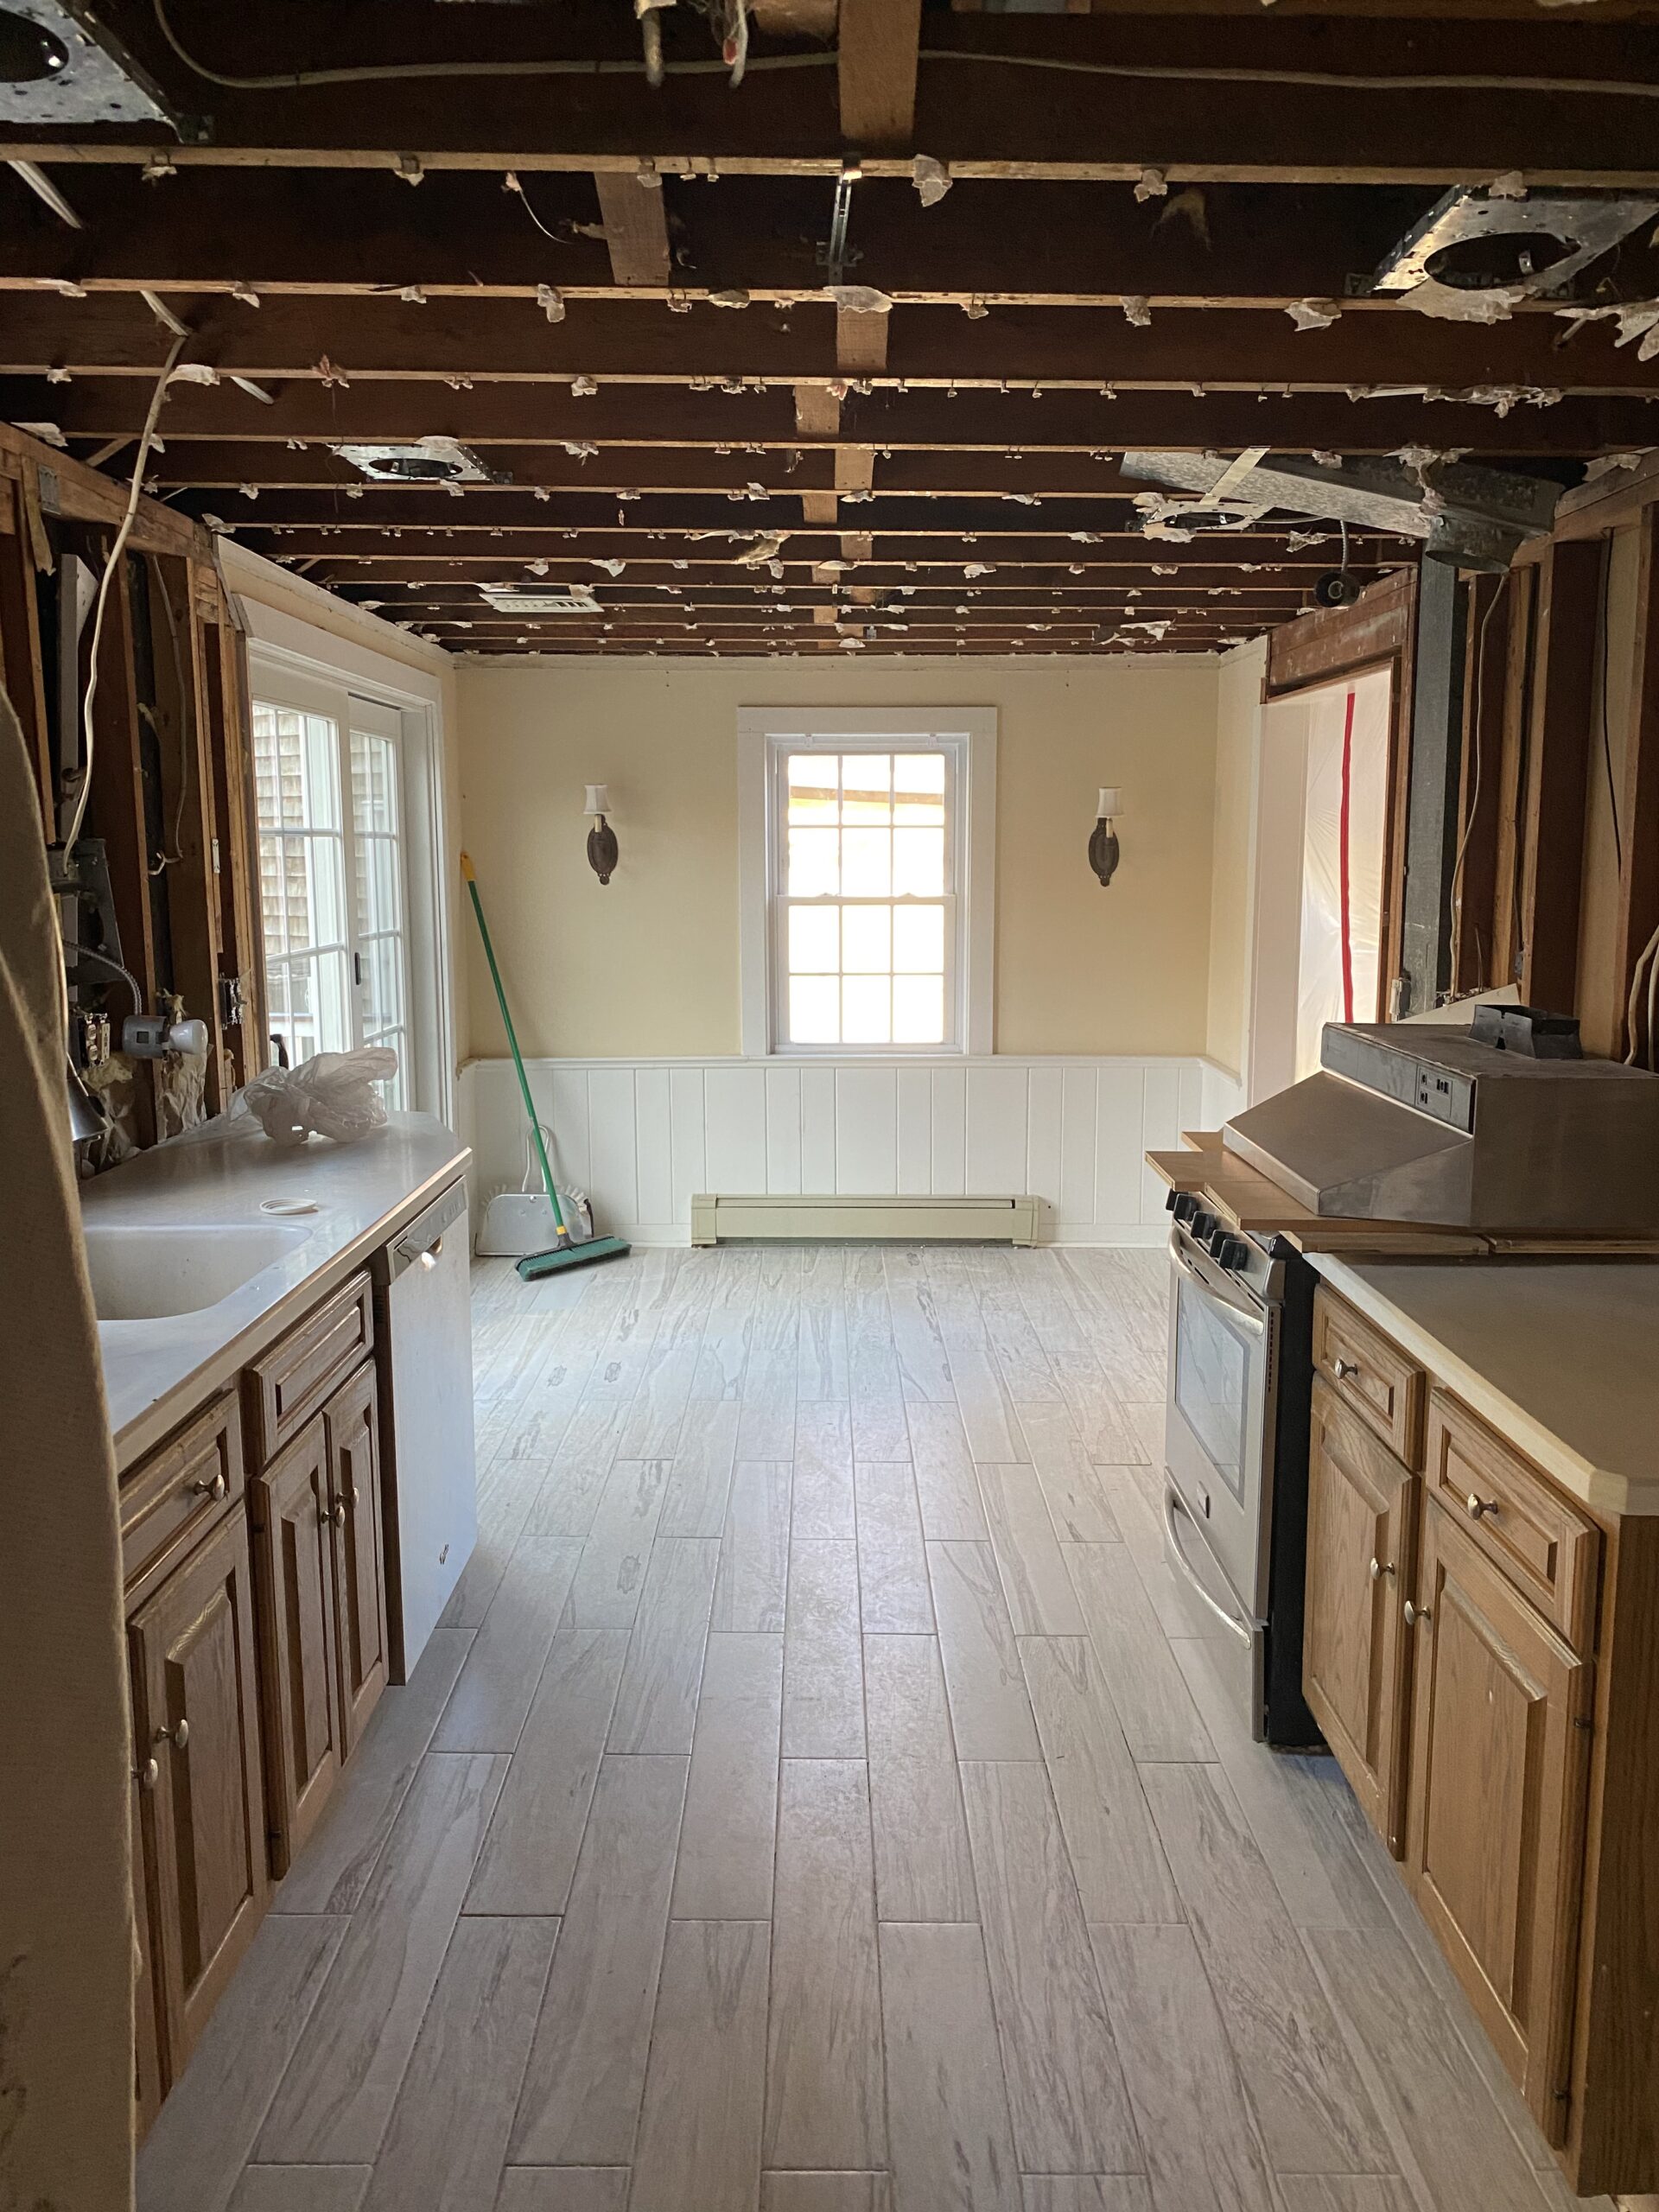 ceiling rafters exposed in galley kitchen renovation